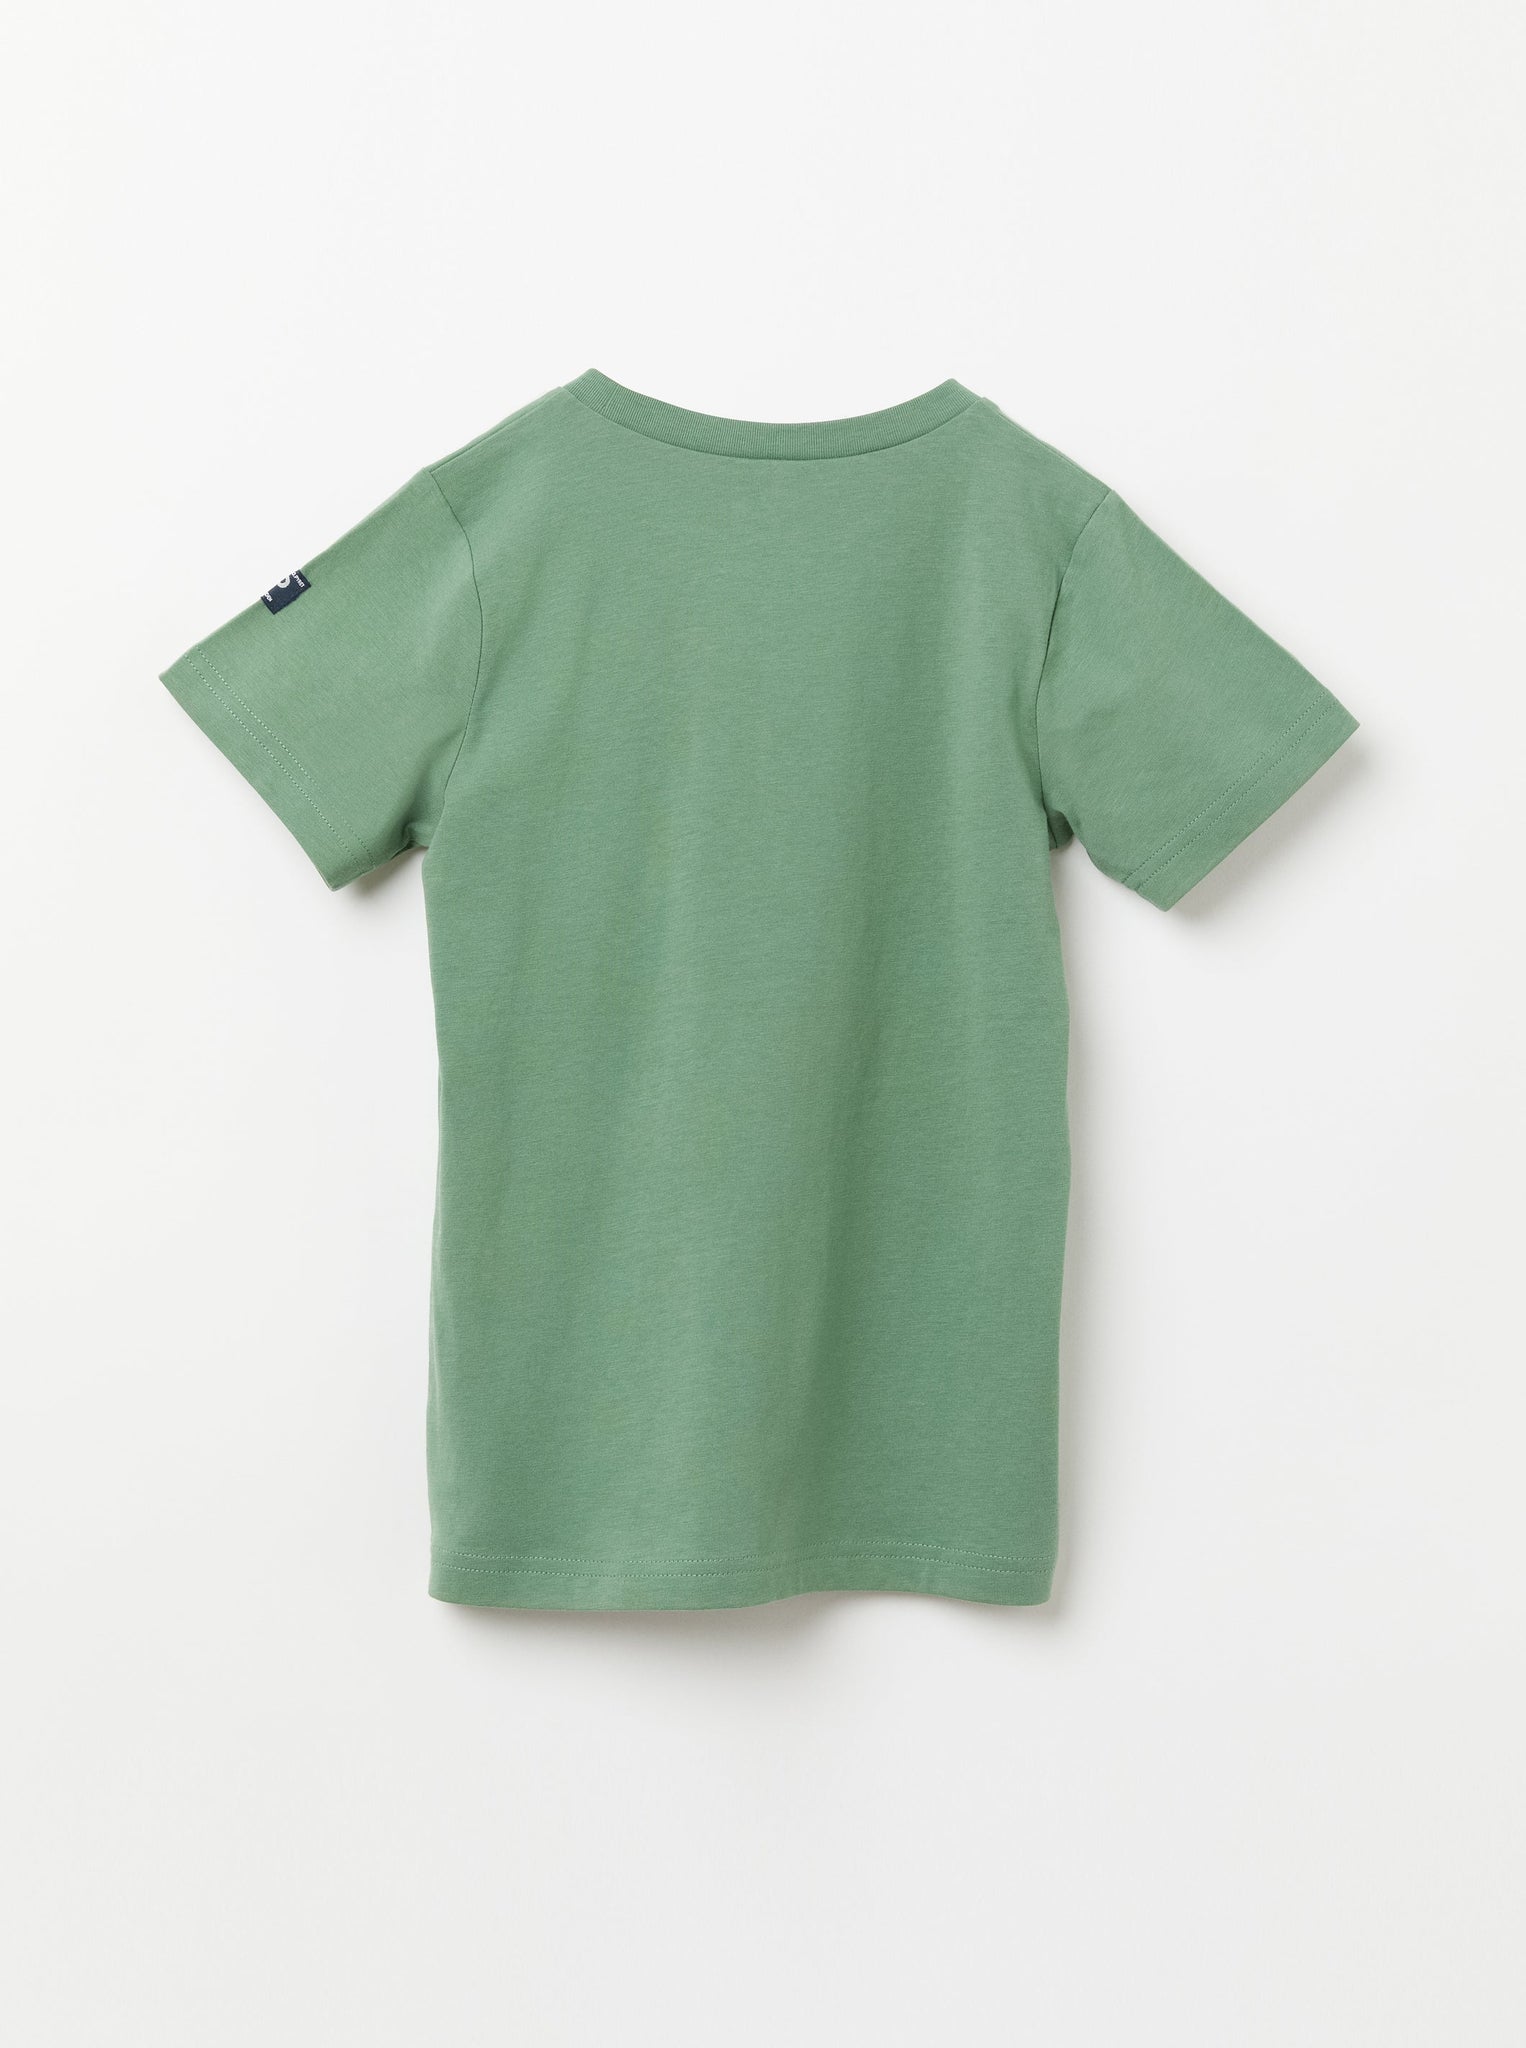 Organic Cotton Kids Dinosaur T-Shirt from the Polarn O. Pyret Kidswear collection. Nordic kids clothes made from sustainable sources.